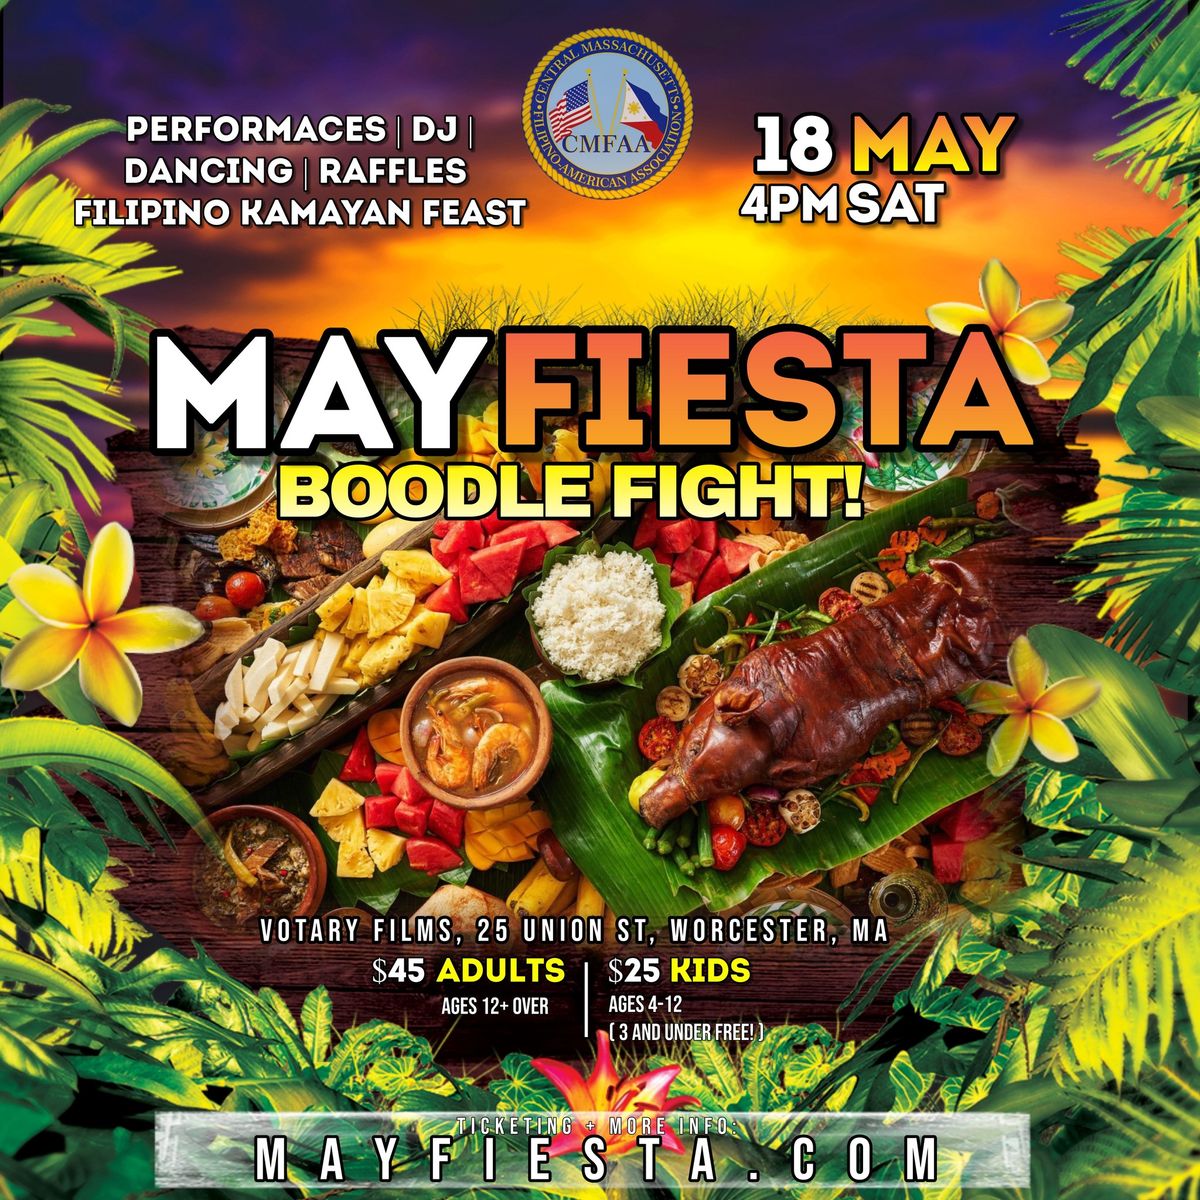 May Fiesta: Boodle Fight!